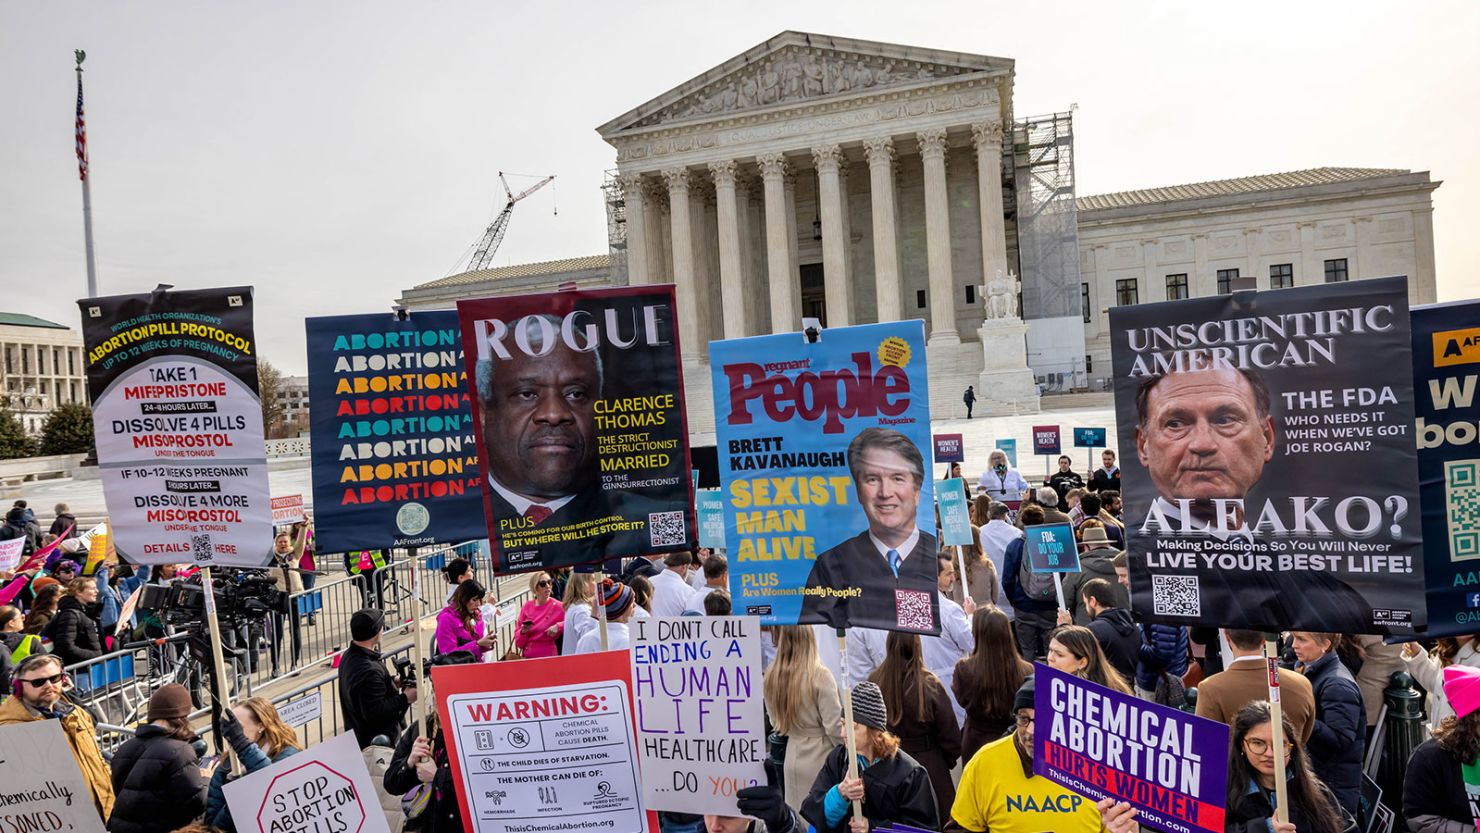 Demonstrators protest and argue outside the US Supreme Court on Tuesday.